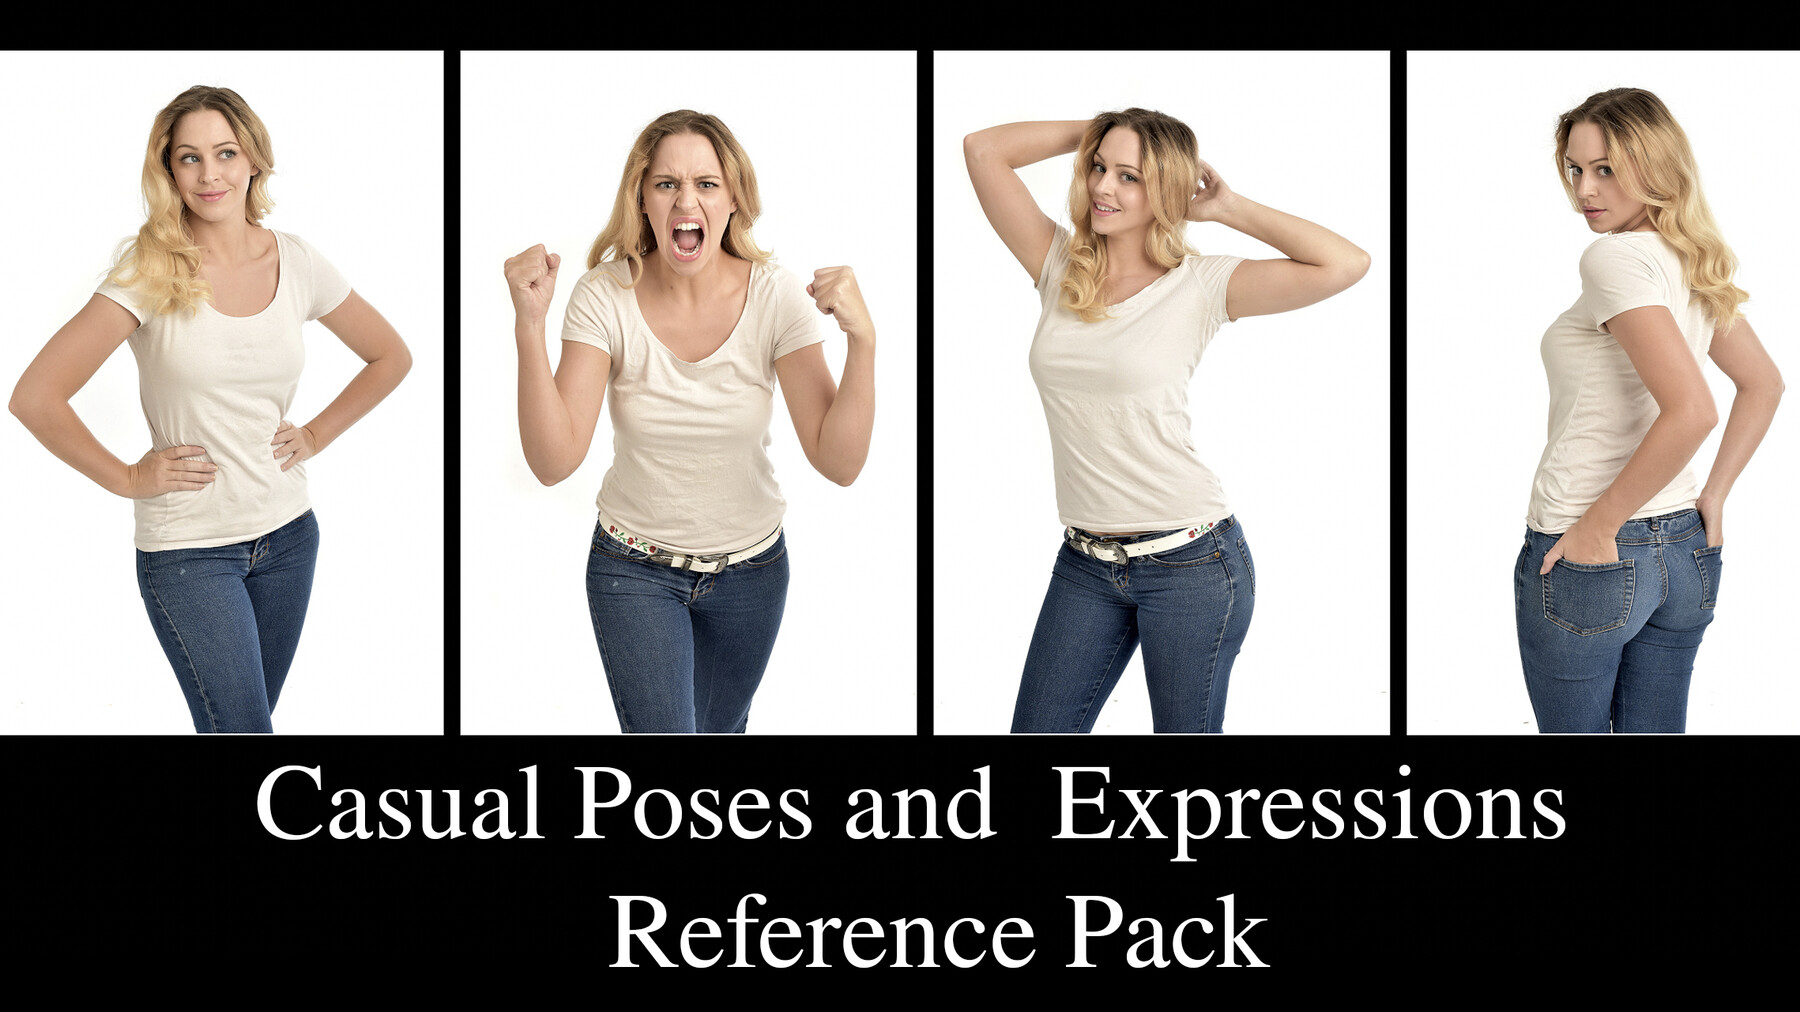 Man Casual Style Poses Stock Photo 366684398 | Shutterstock